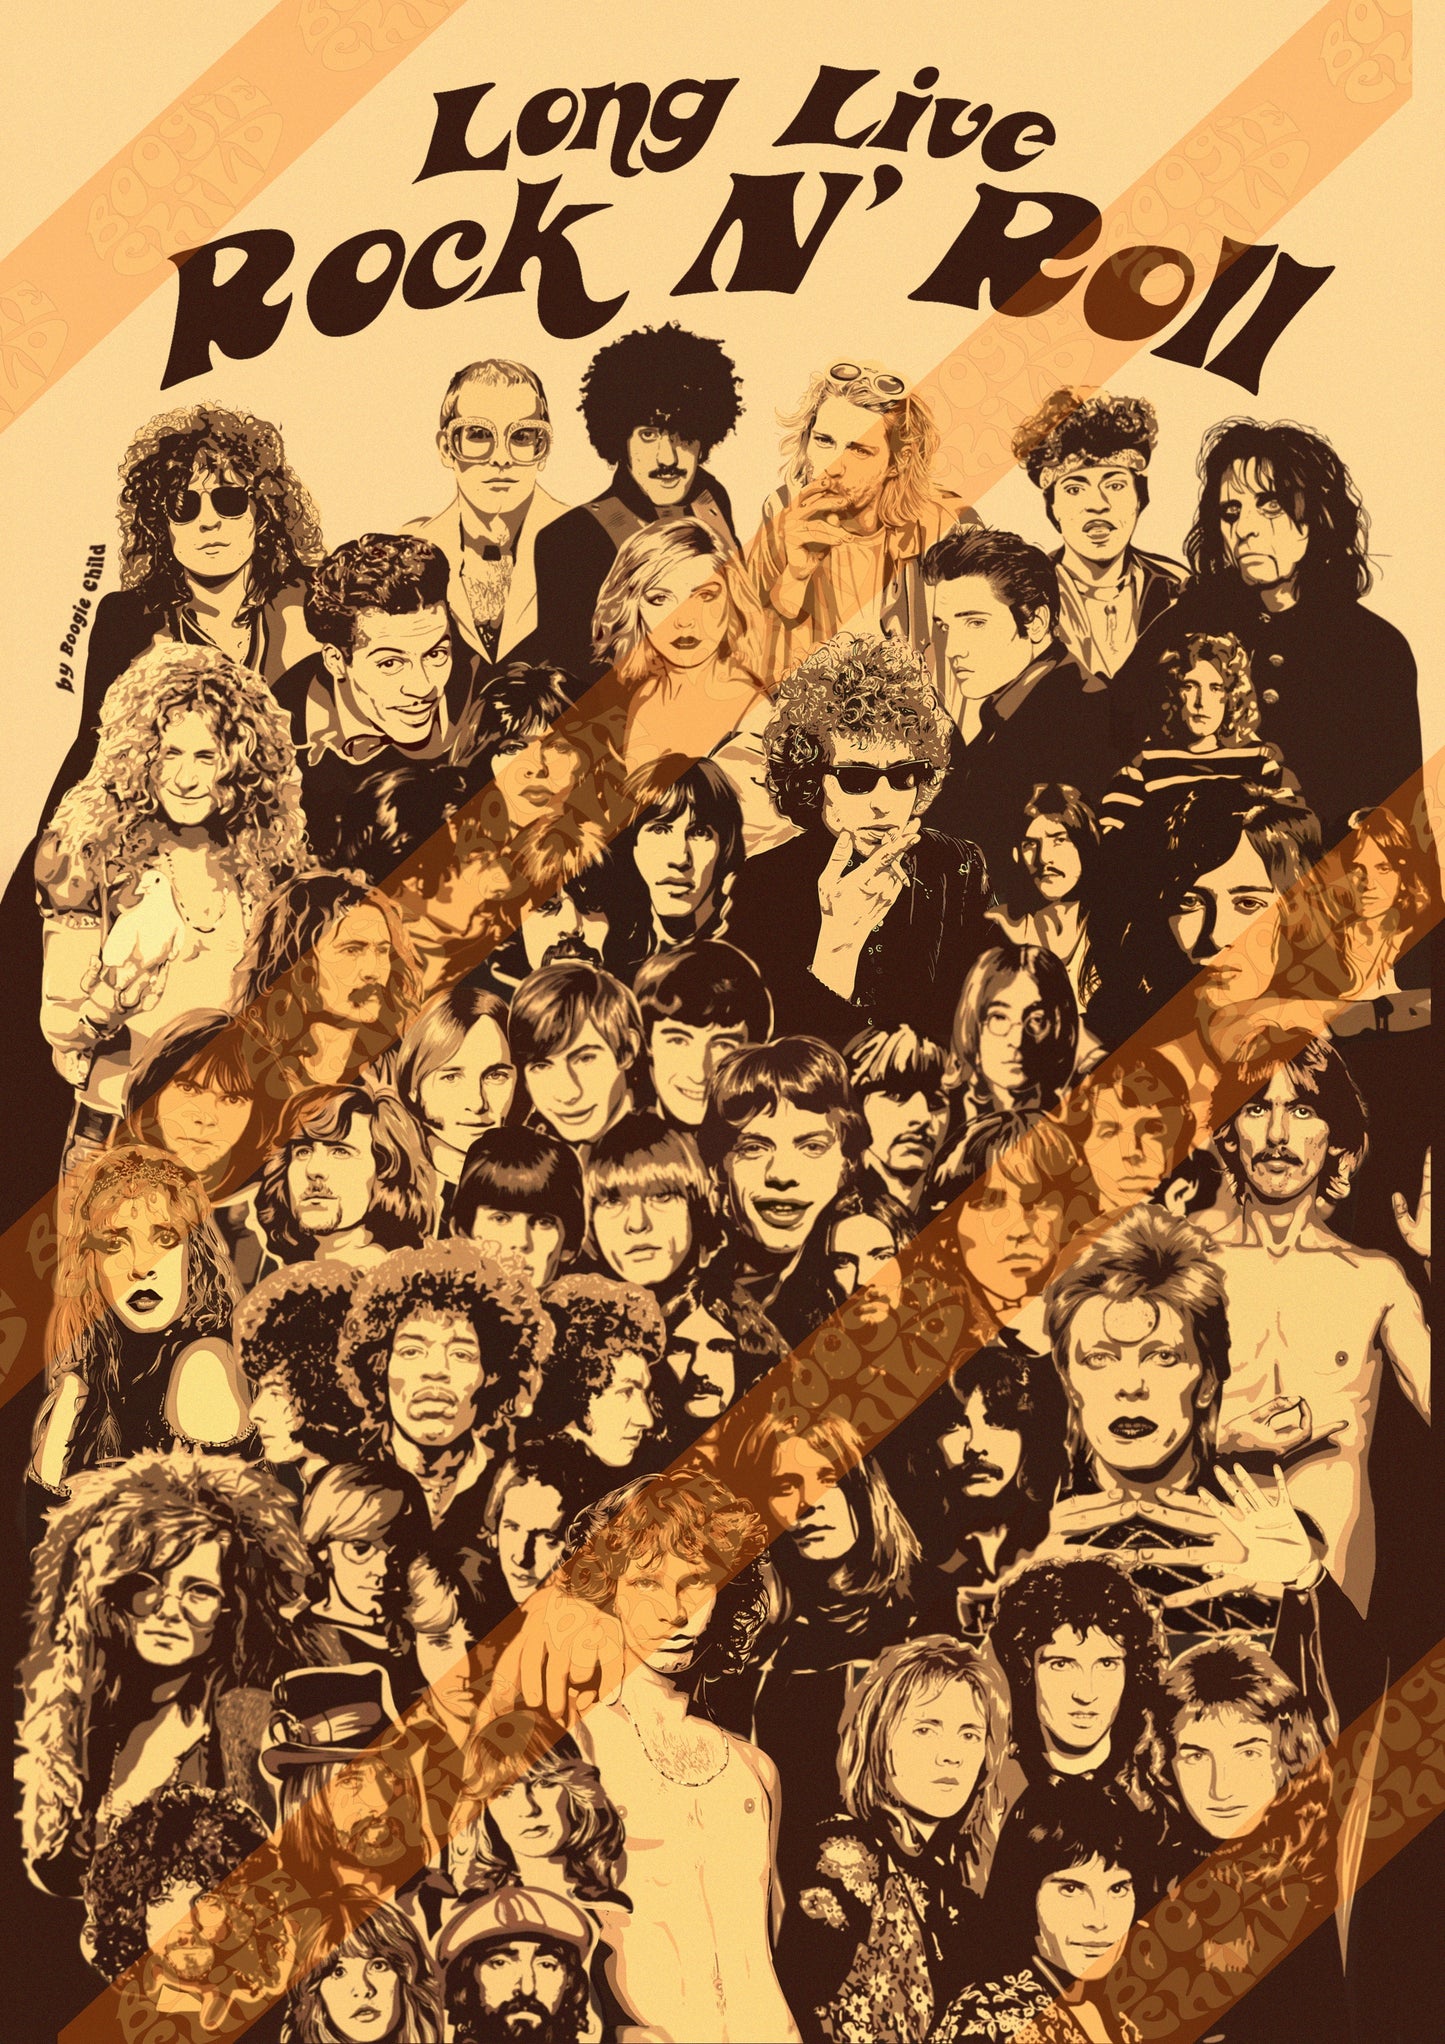 The Rock N’ Roll Print - Size A3 / 11.7" × 16.5"